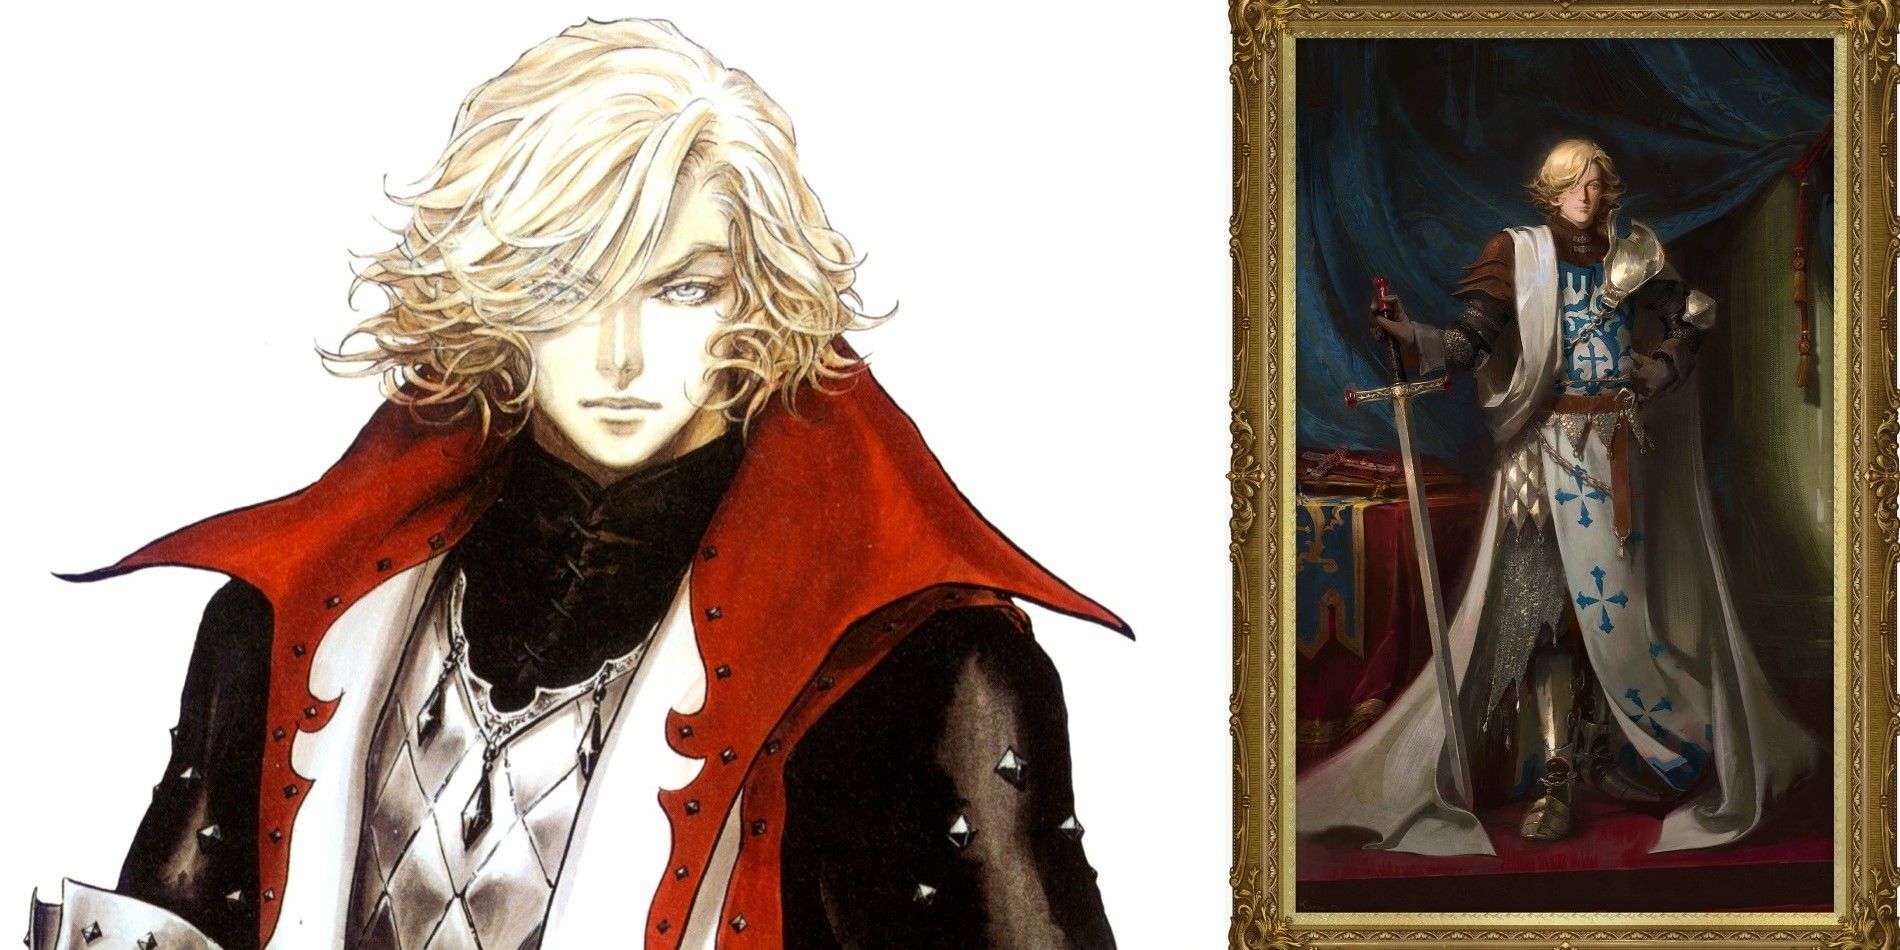 Leon Bellmont From Castlevania videogames and his portrait from Netflix